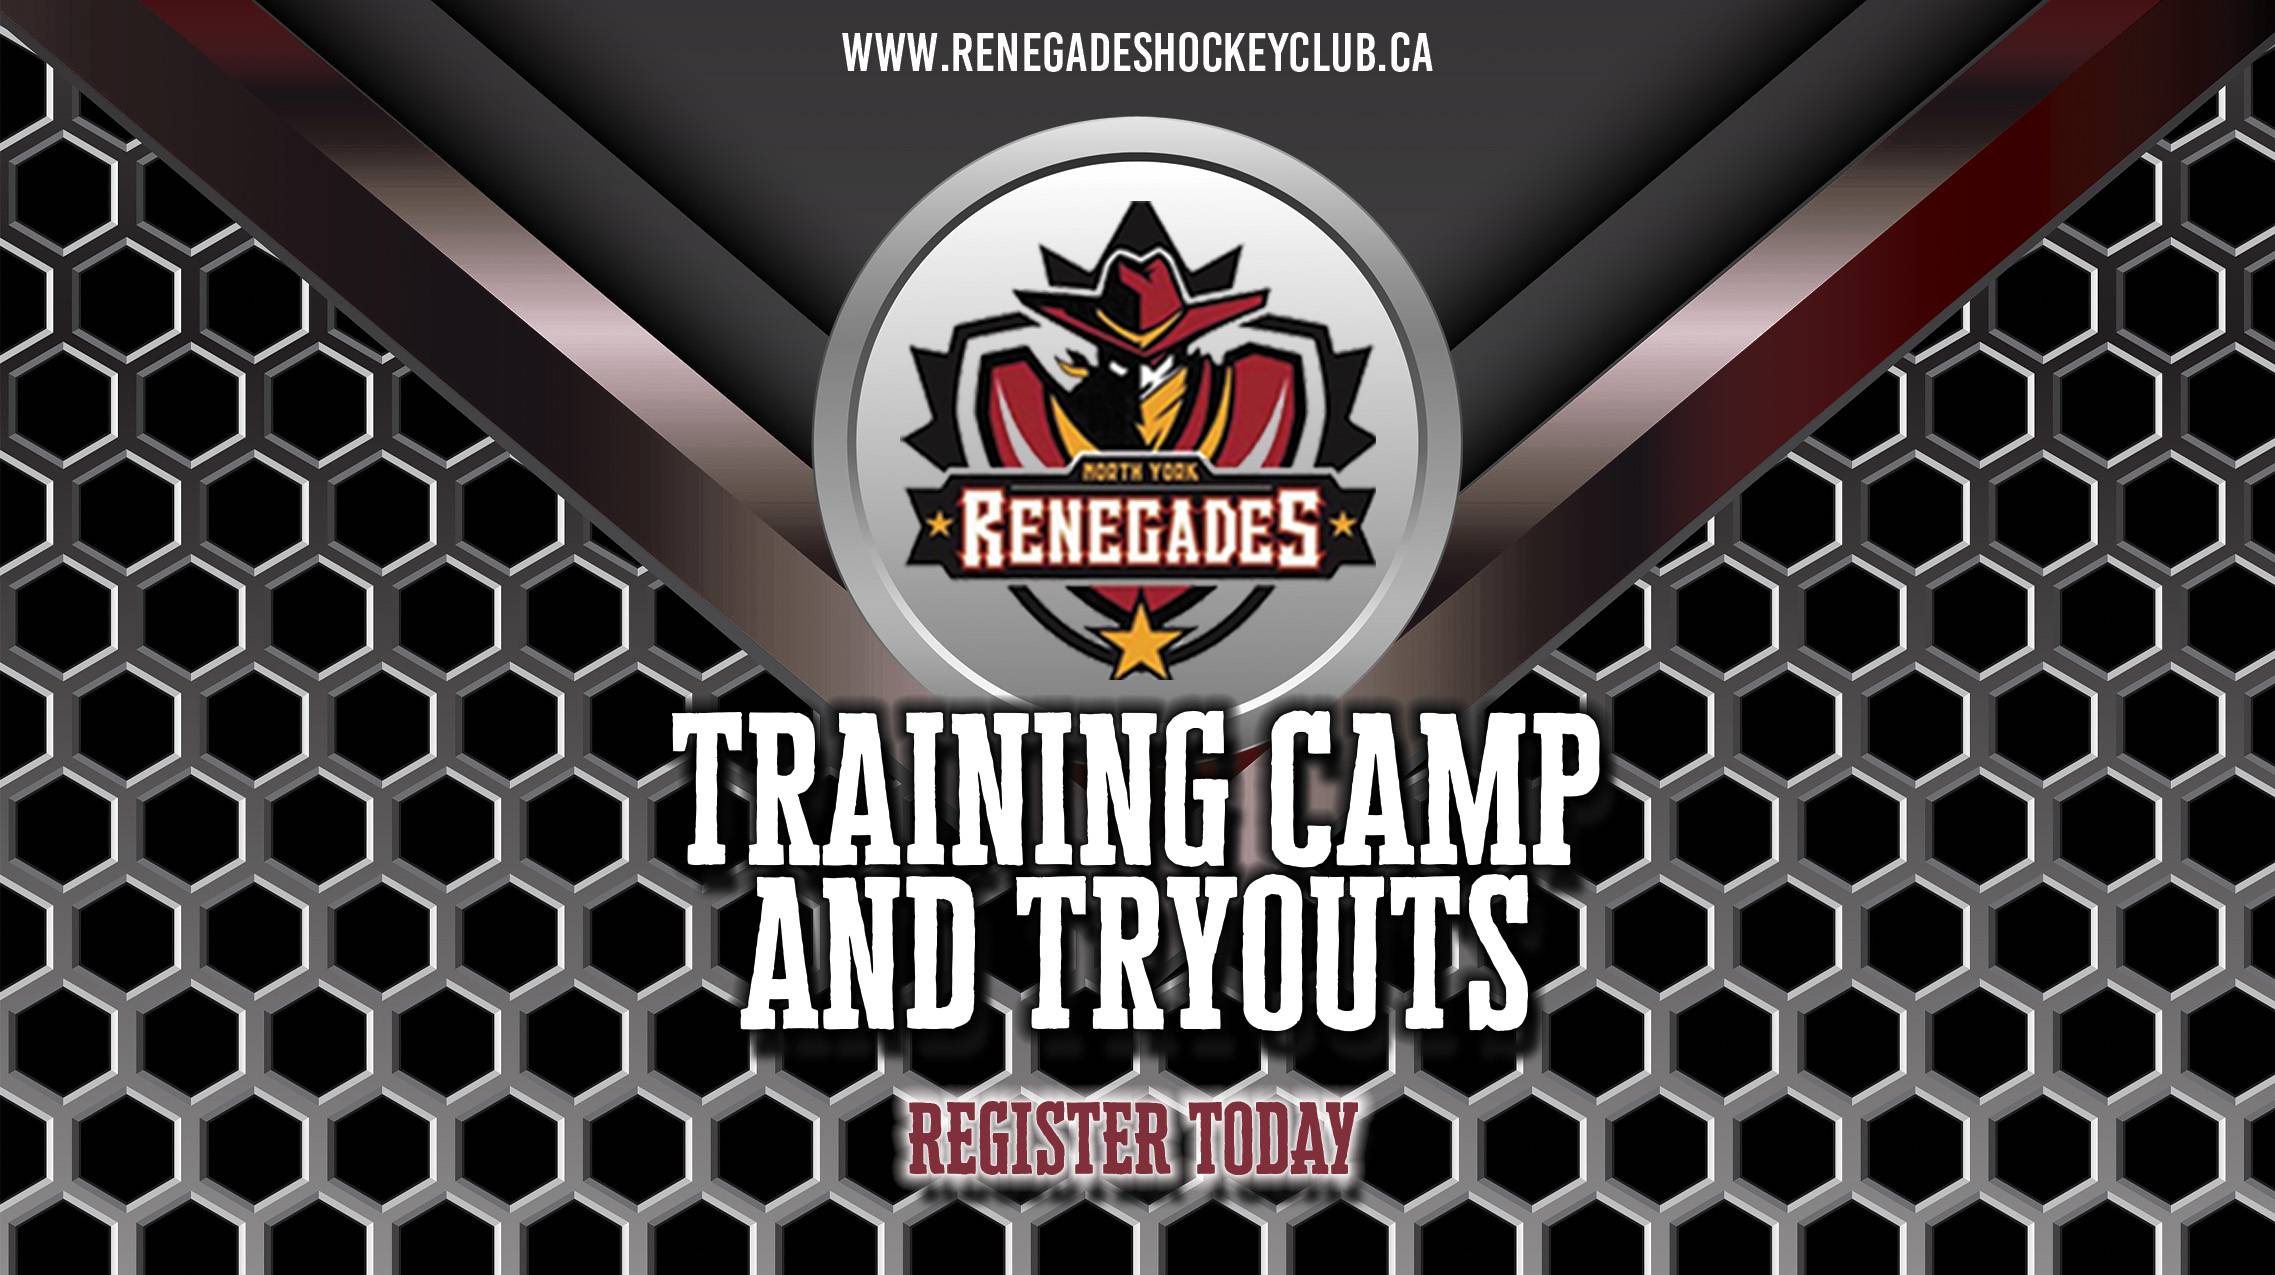 North York Renegades Junior hockey tryouts for GMHL team